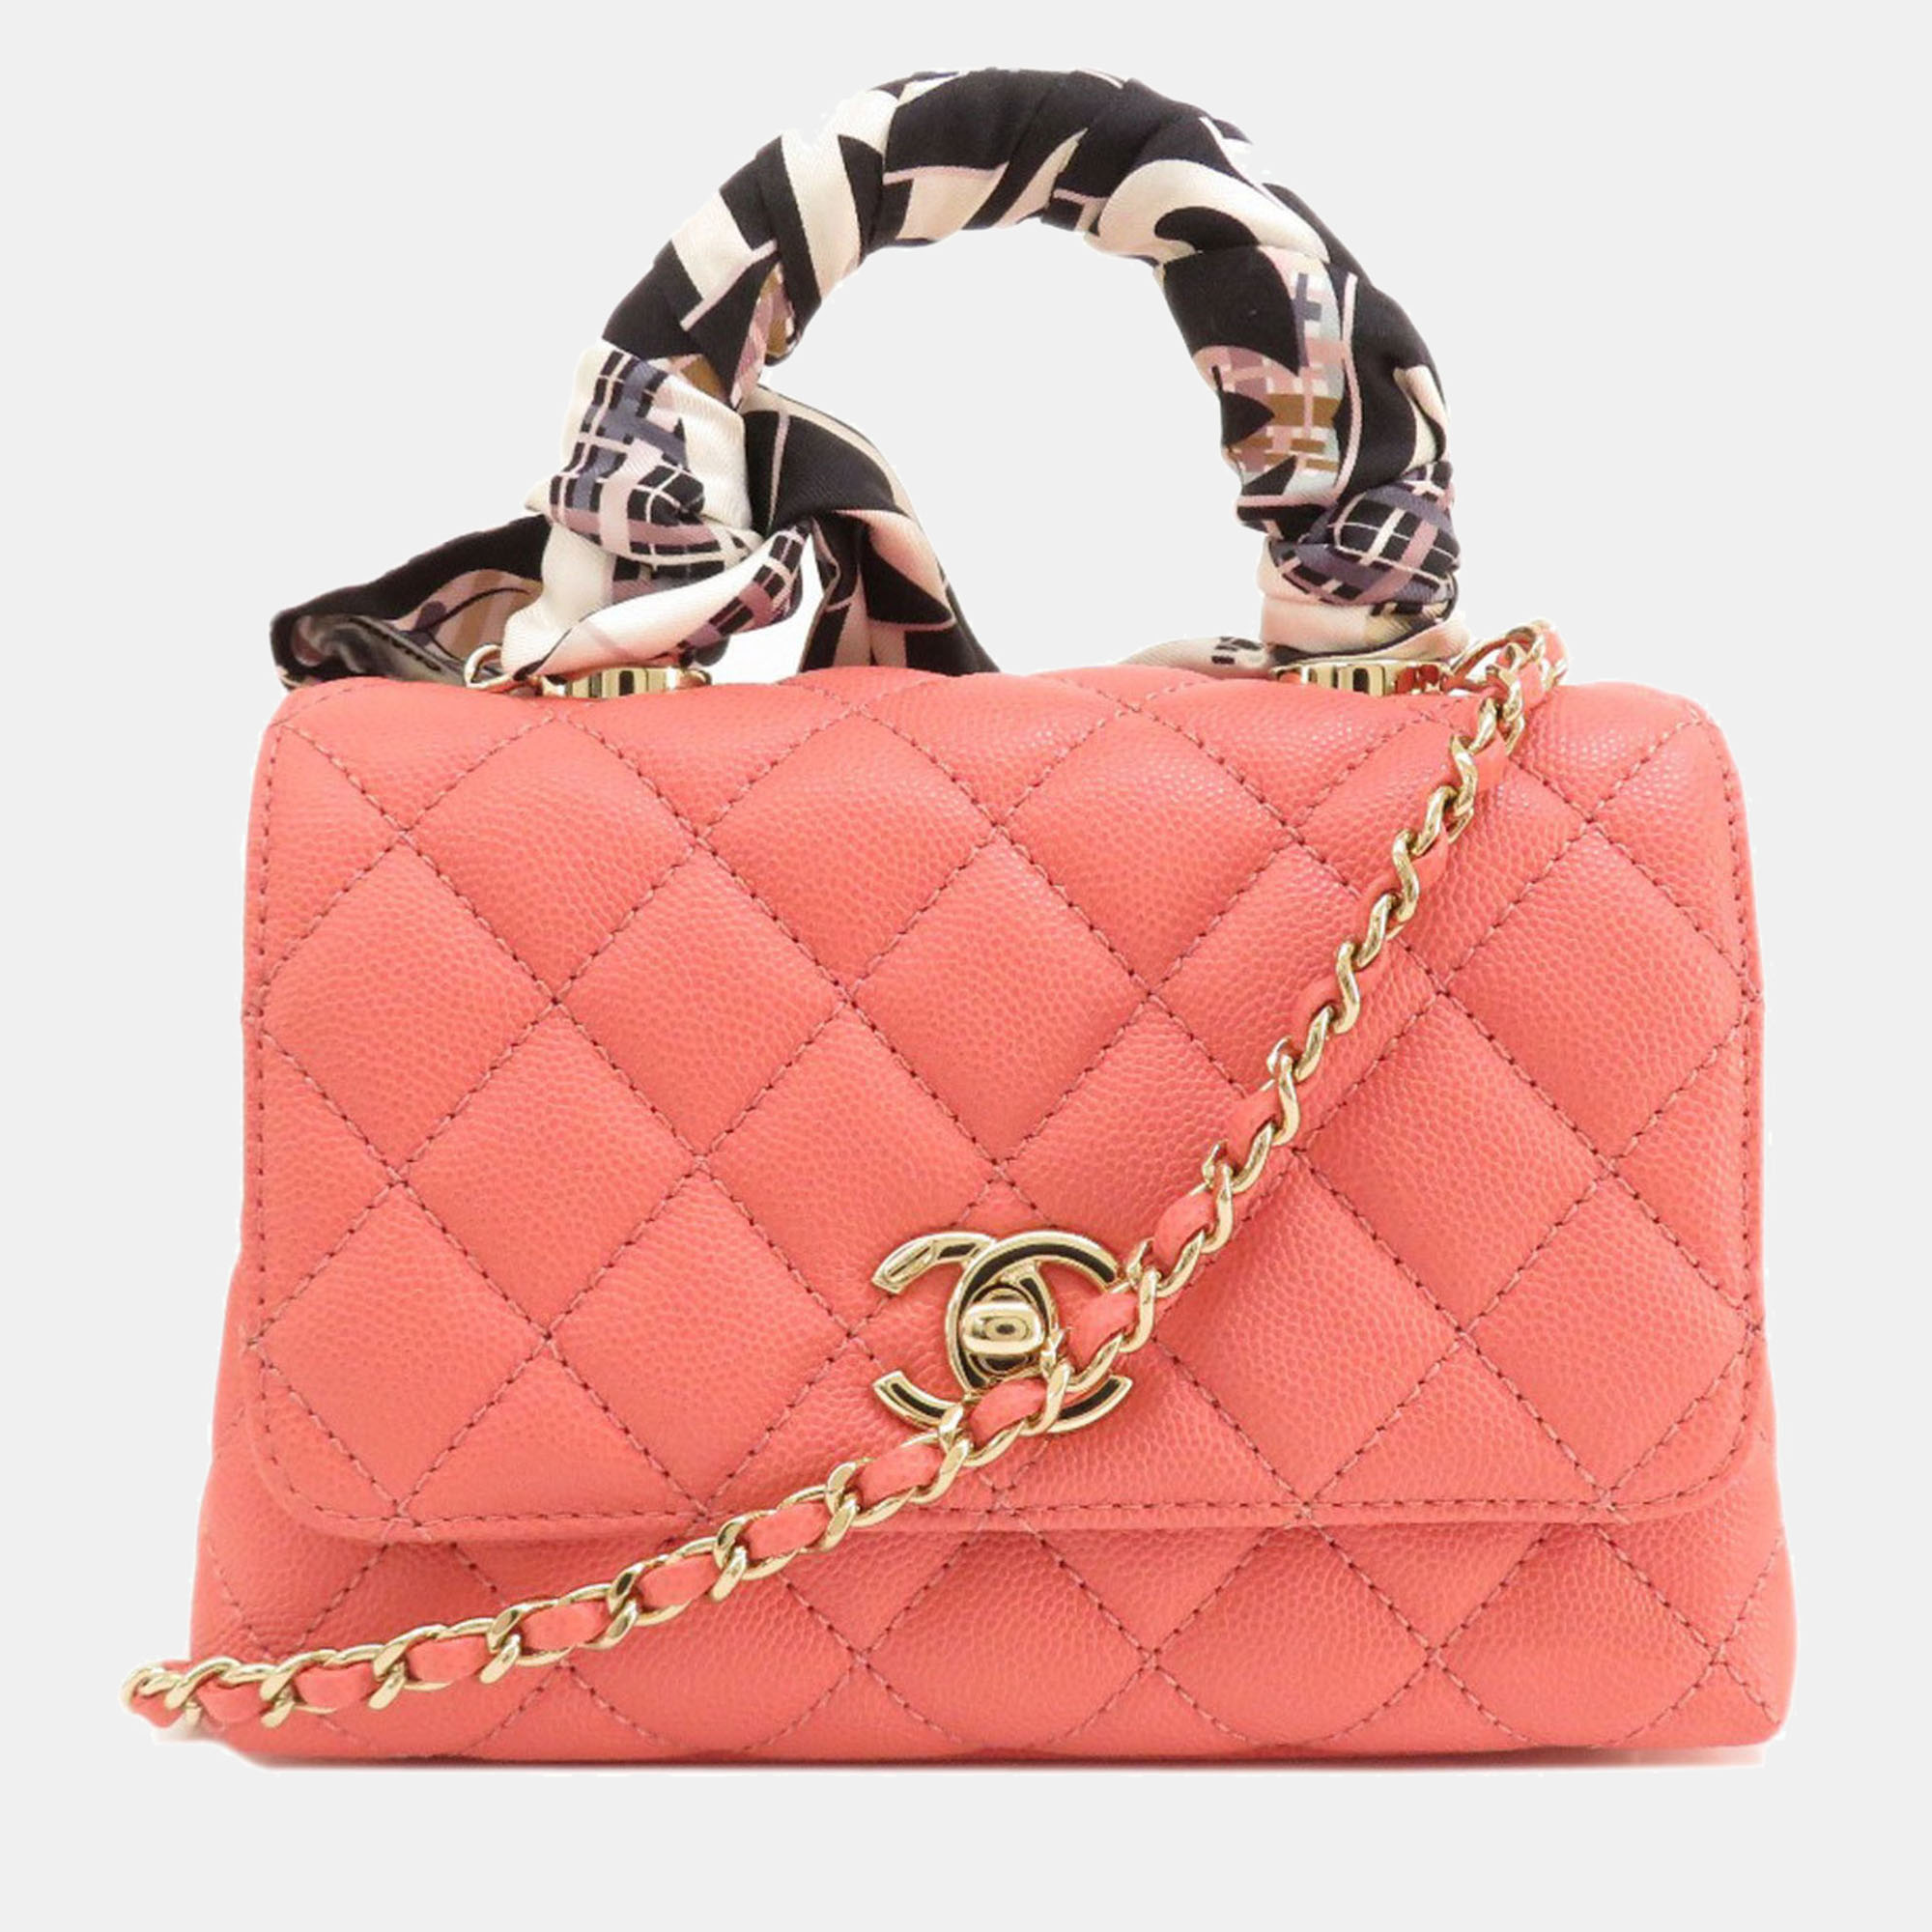 Pre-owned Chanel Pink Leather Caviar Twilly Coco Top Handle Bag